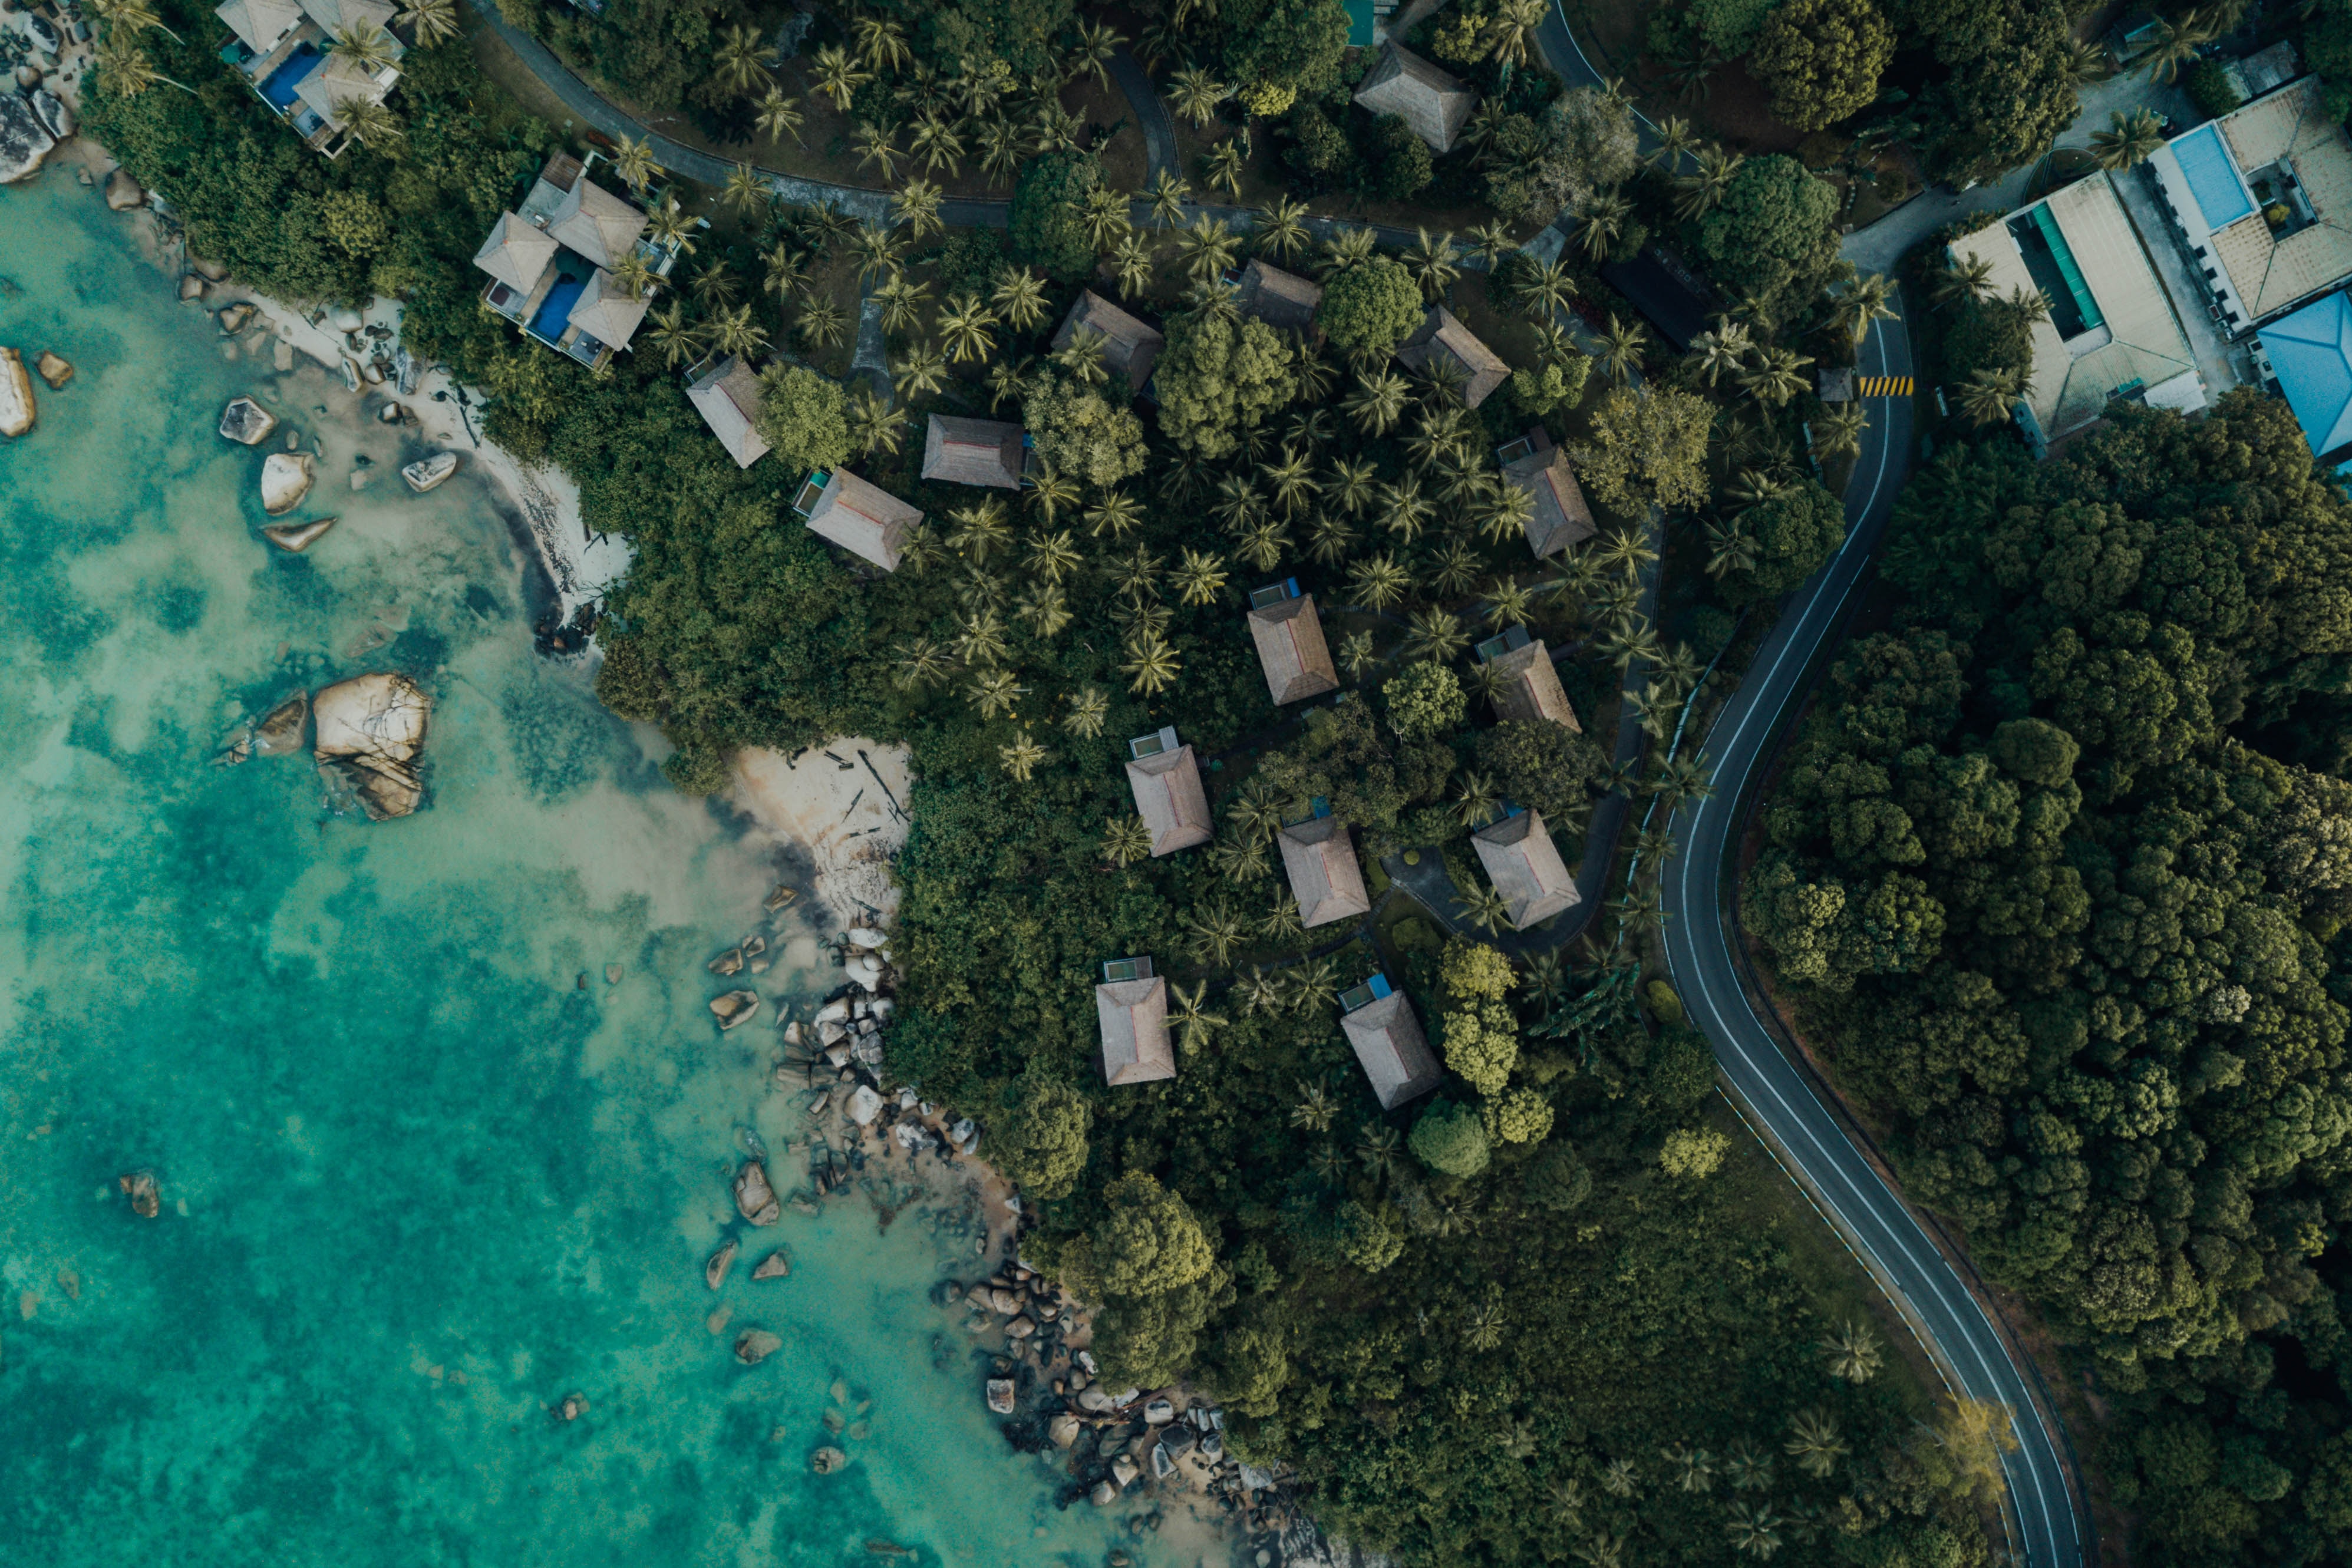 view from above, nature, trees, sea, building, shore, bank